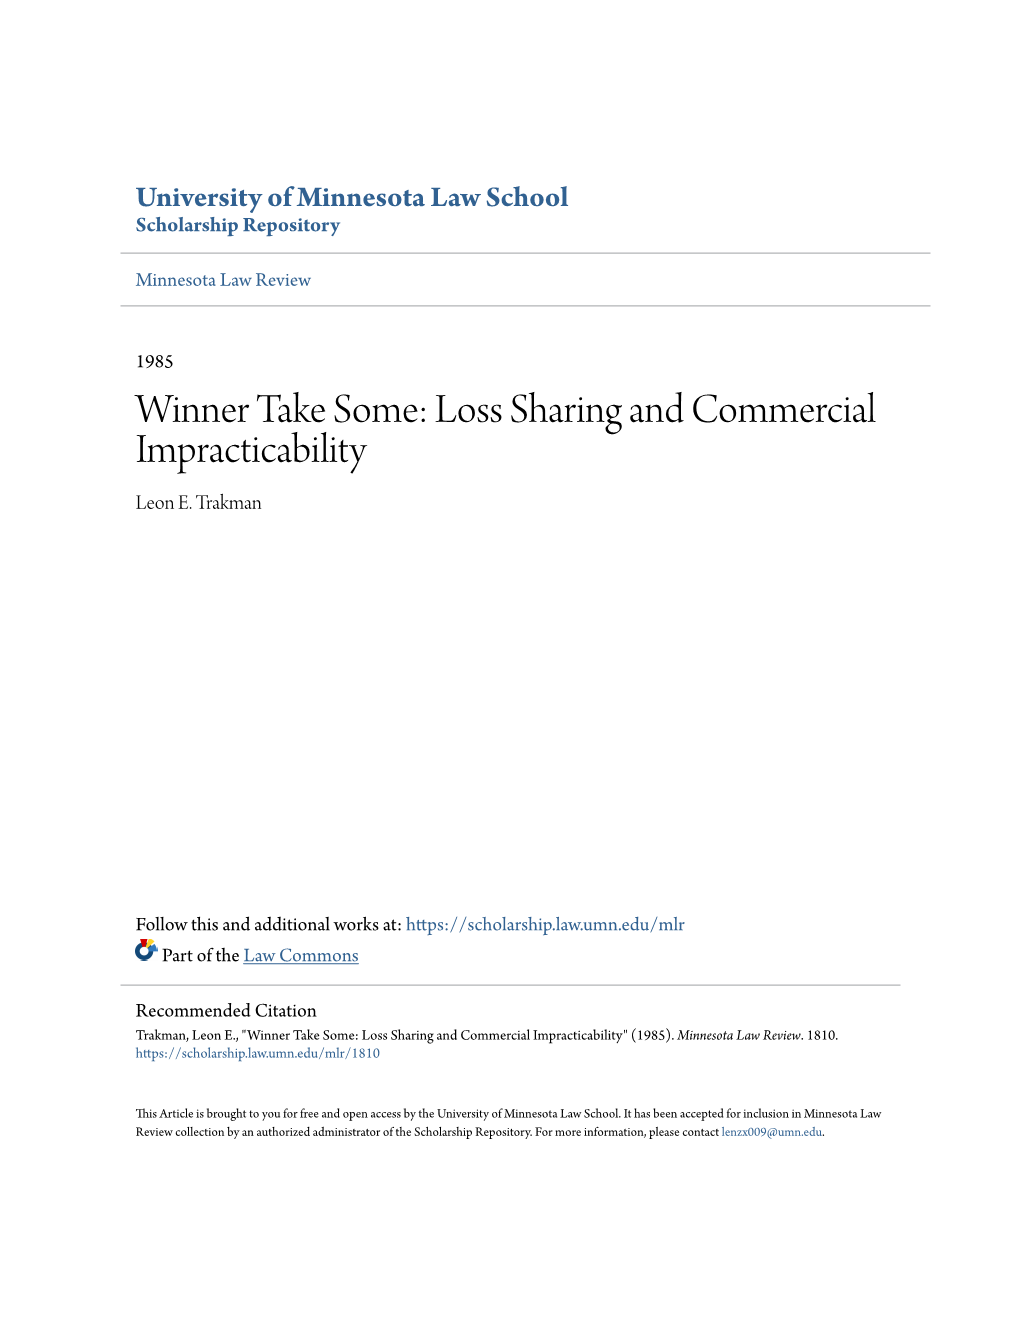 Loss Sharing and Commercial Impracticability Leon E